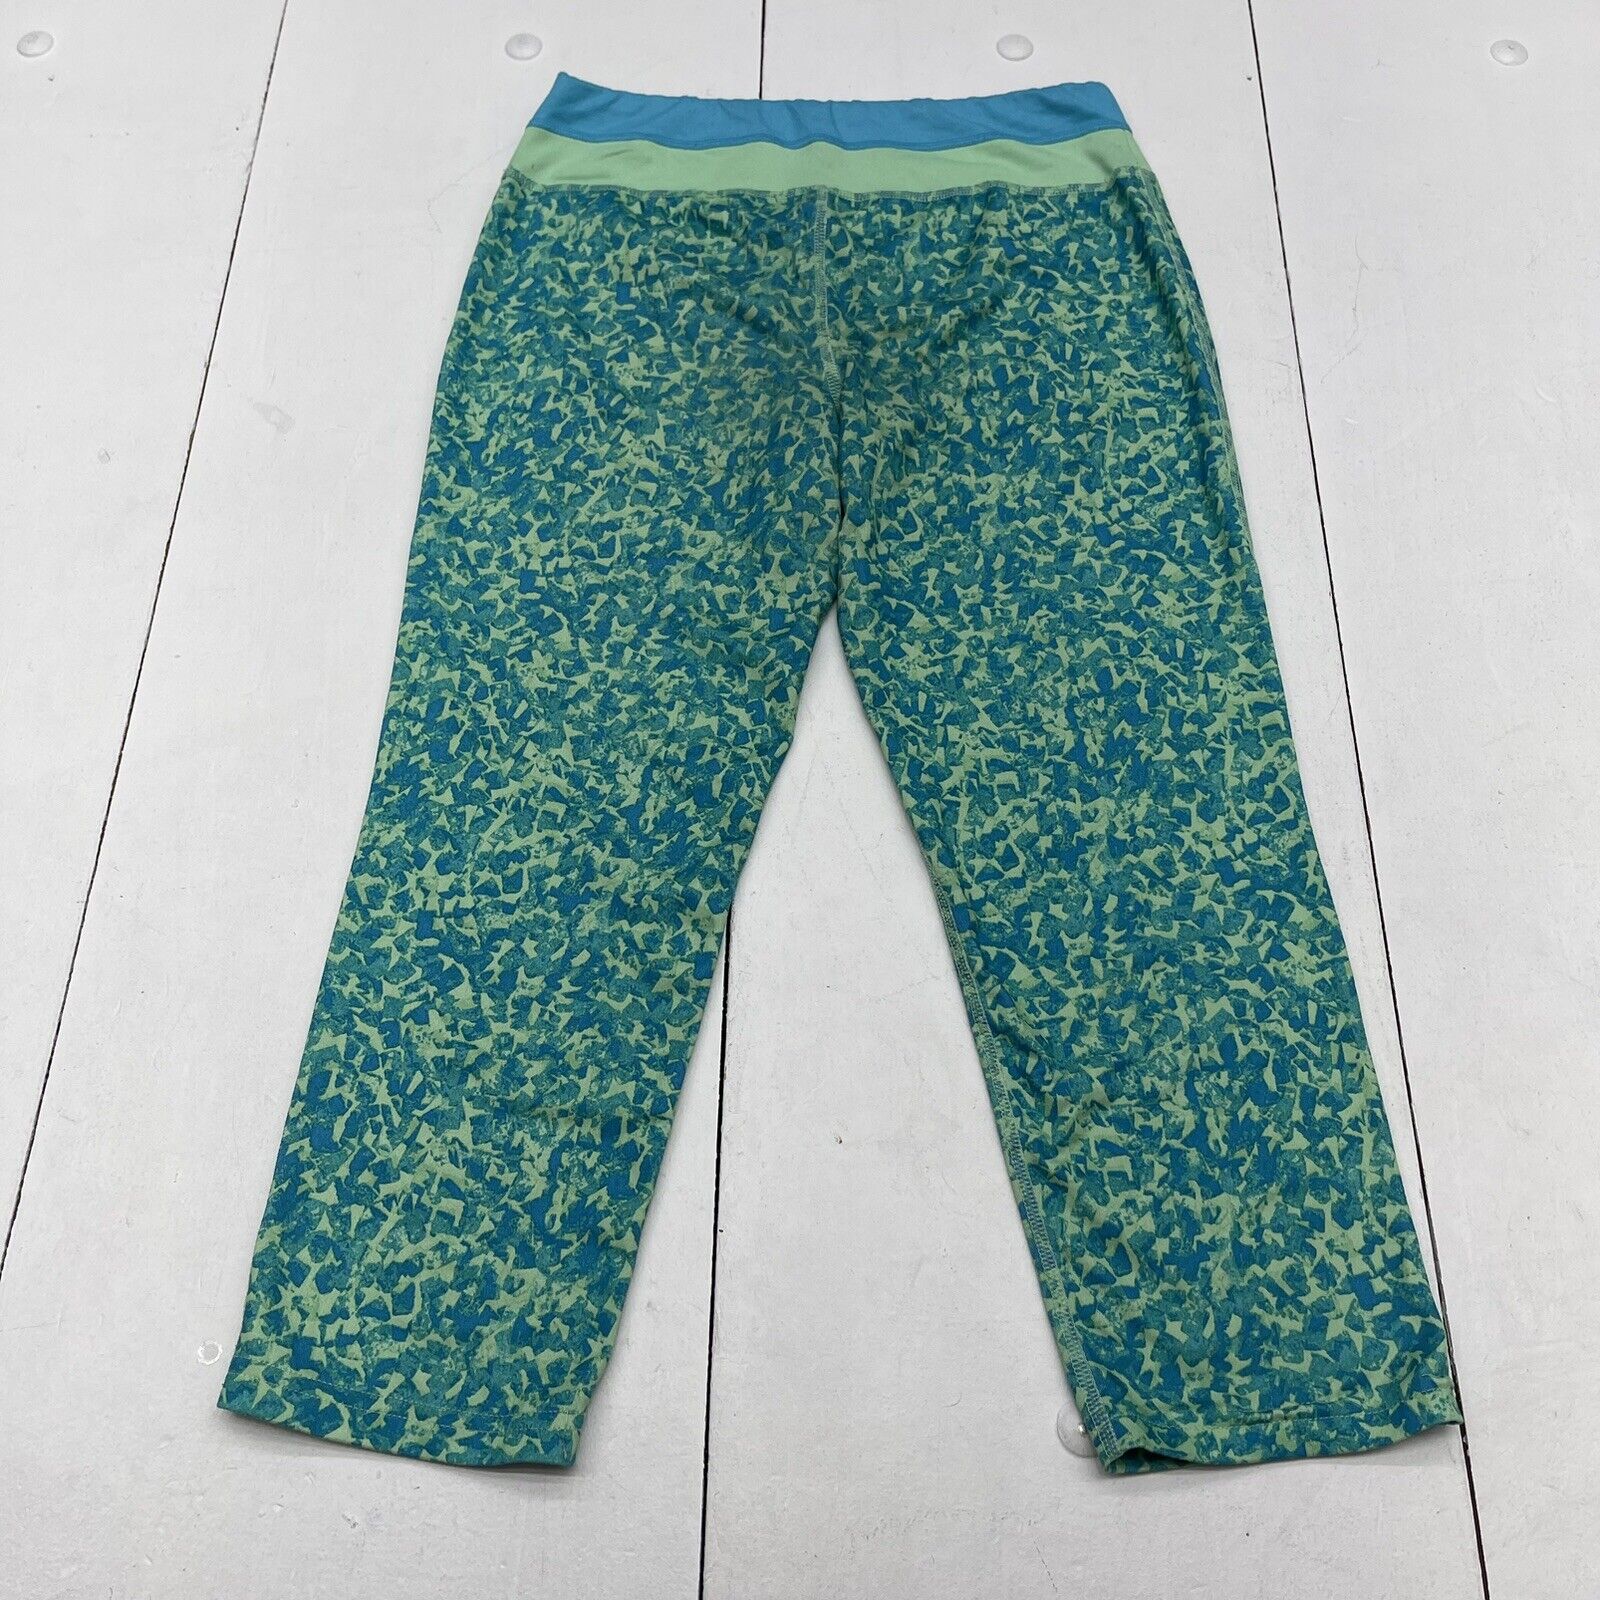 Champion Duo Dry Green & Blue Printed Athletic Leggings Youth Girls Si -  beyond exchange